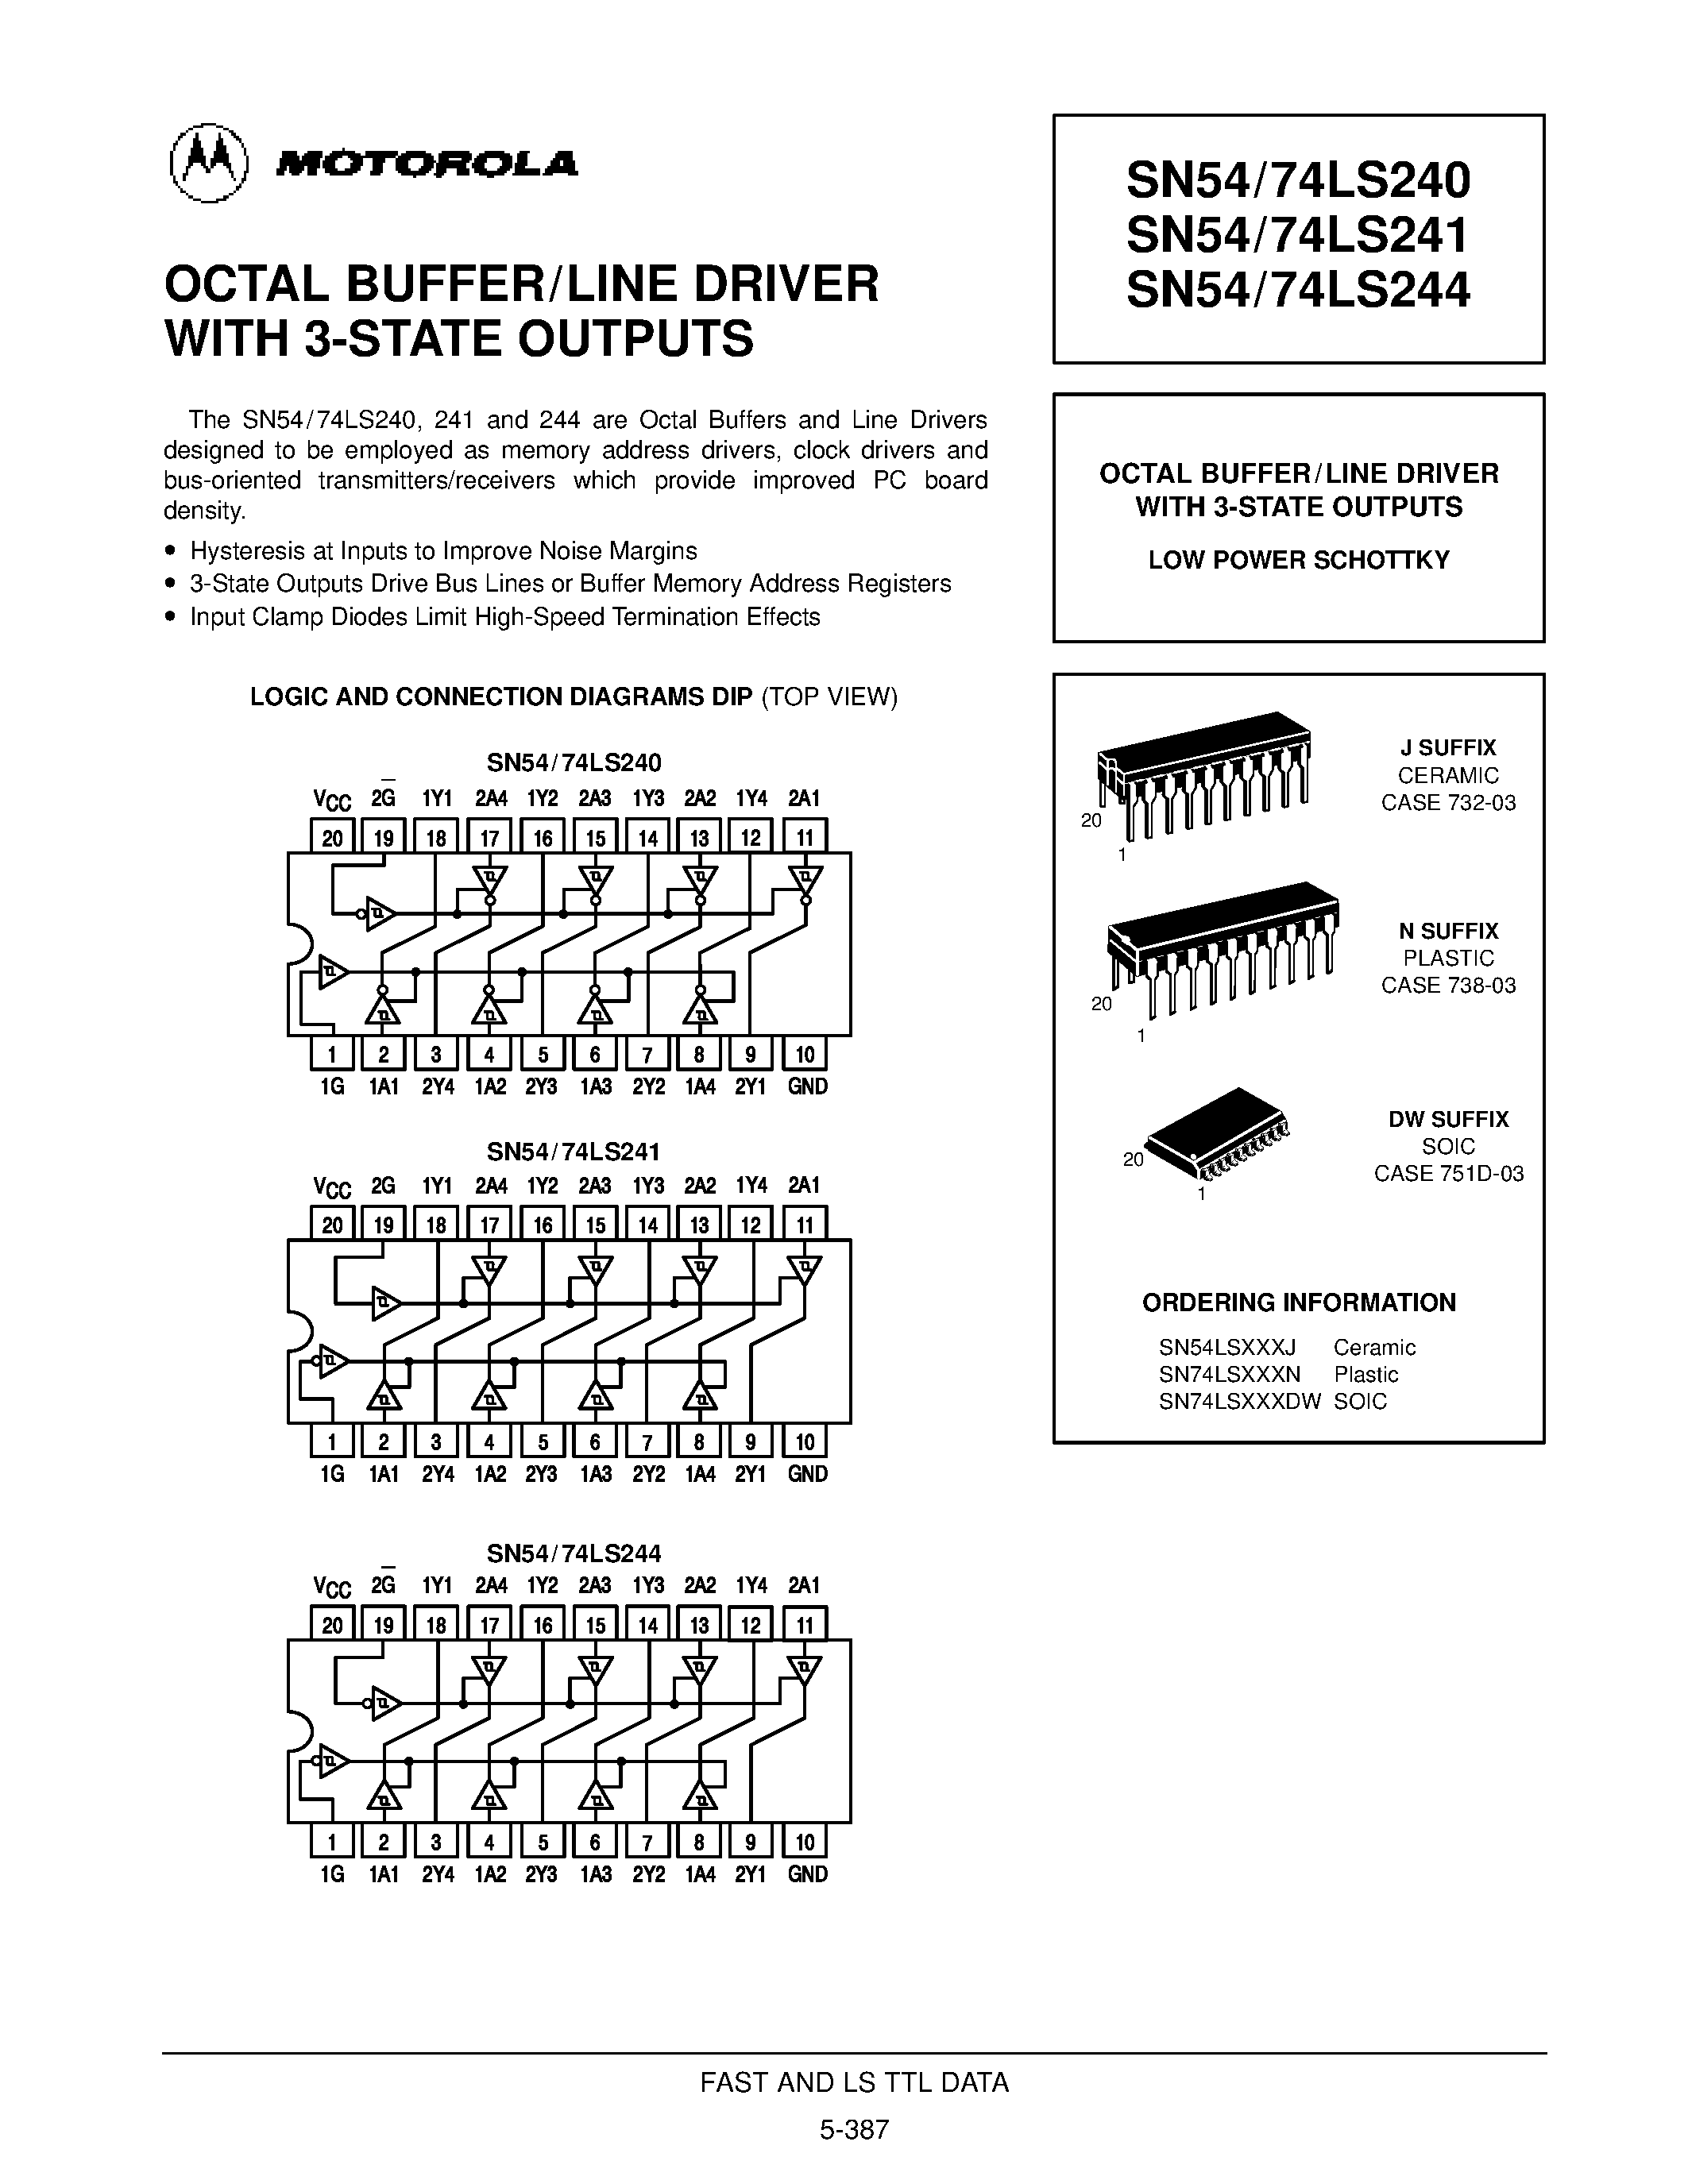 Datasheet SN74LS240DW - OCTAL BUFFER/LINE DRIVER WITH 3-STATE OUTPUTS page 1